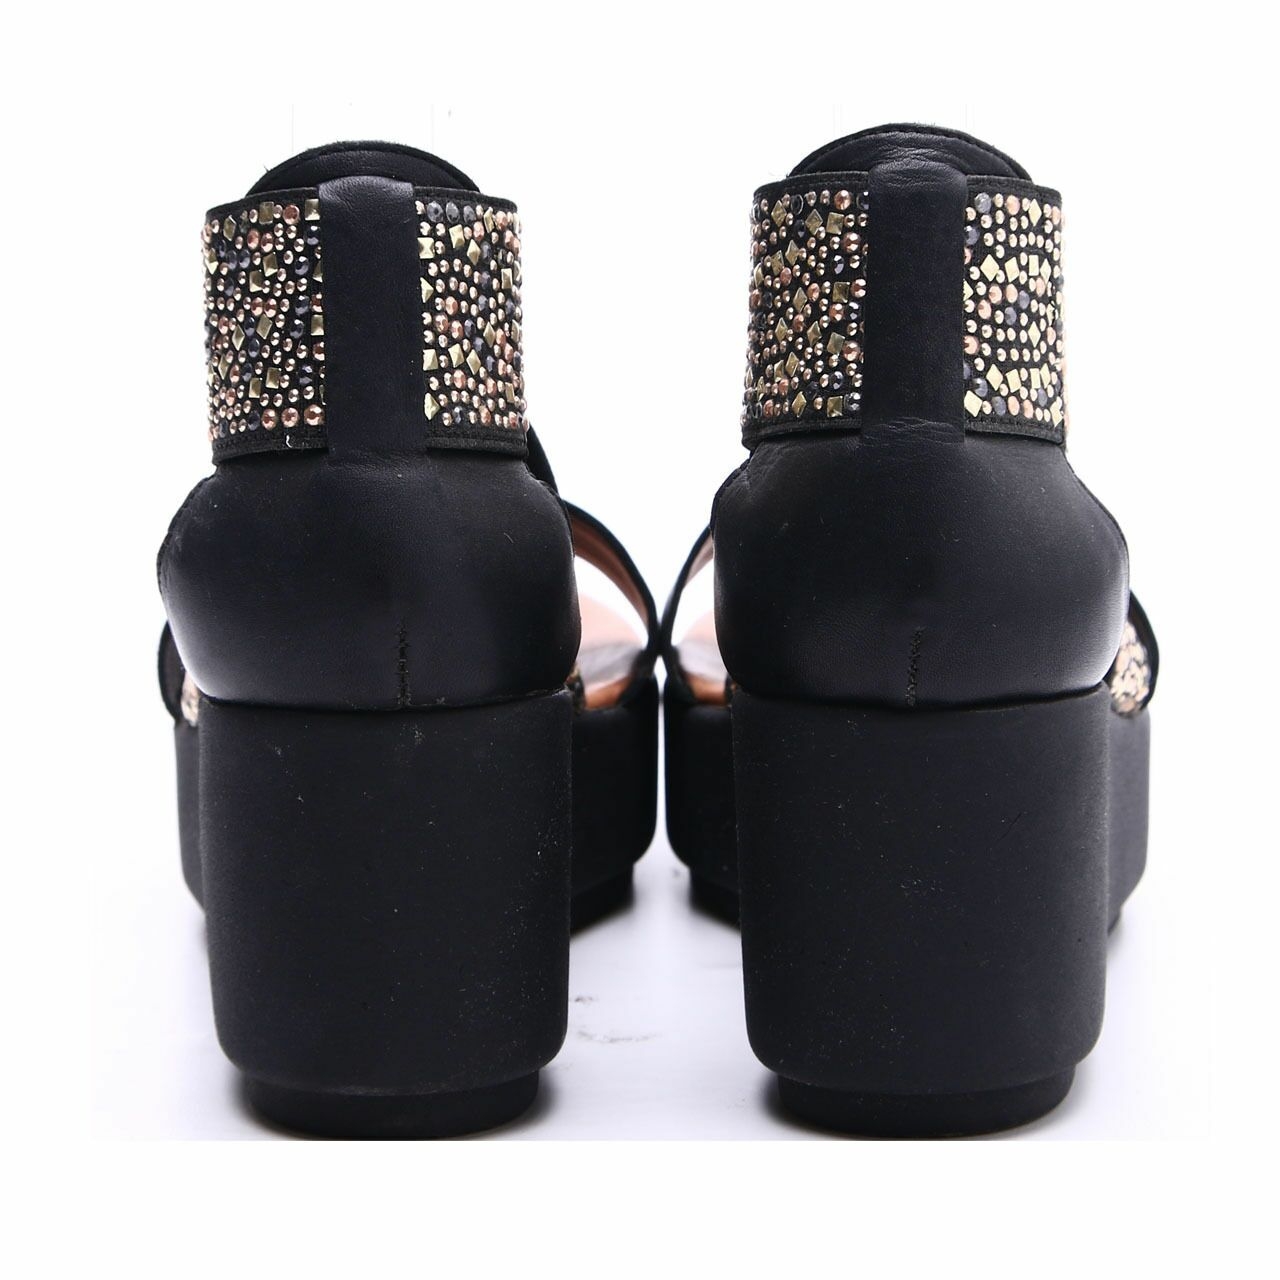 Inuovo Black Leather Sandals